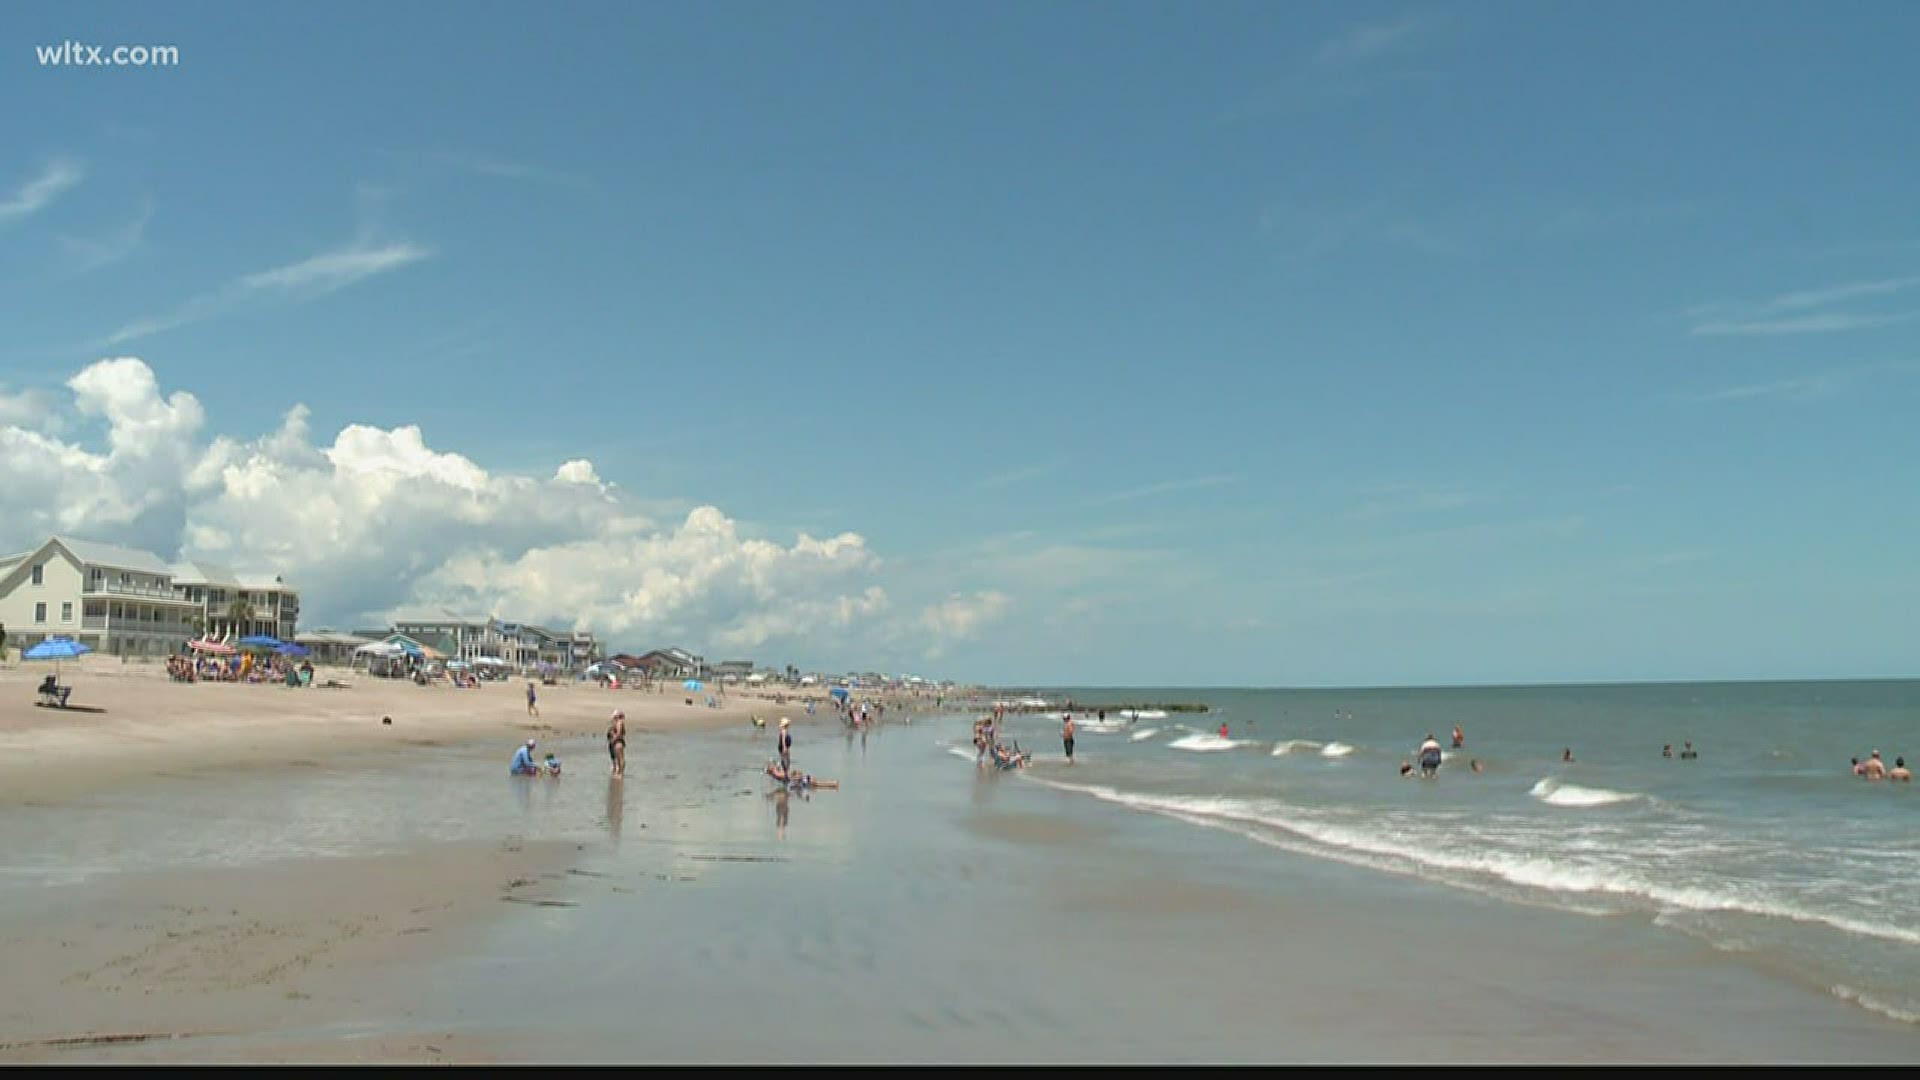 On Tuesday, Myrtle Beach made the move to open all of their beaches to the public but others are slower to open